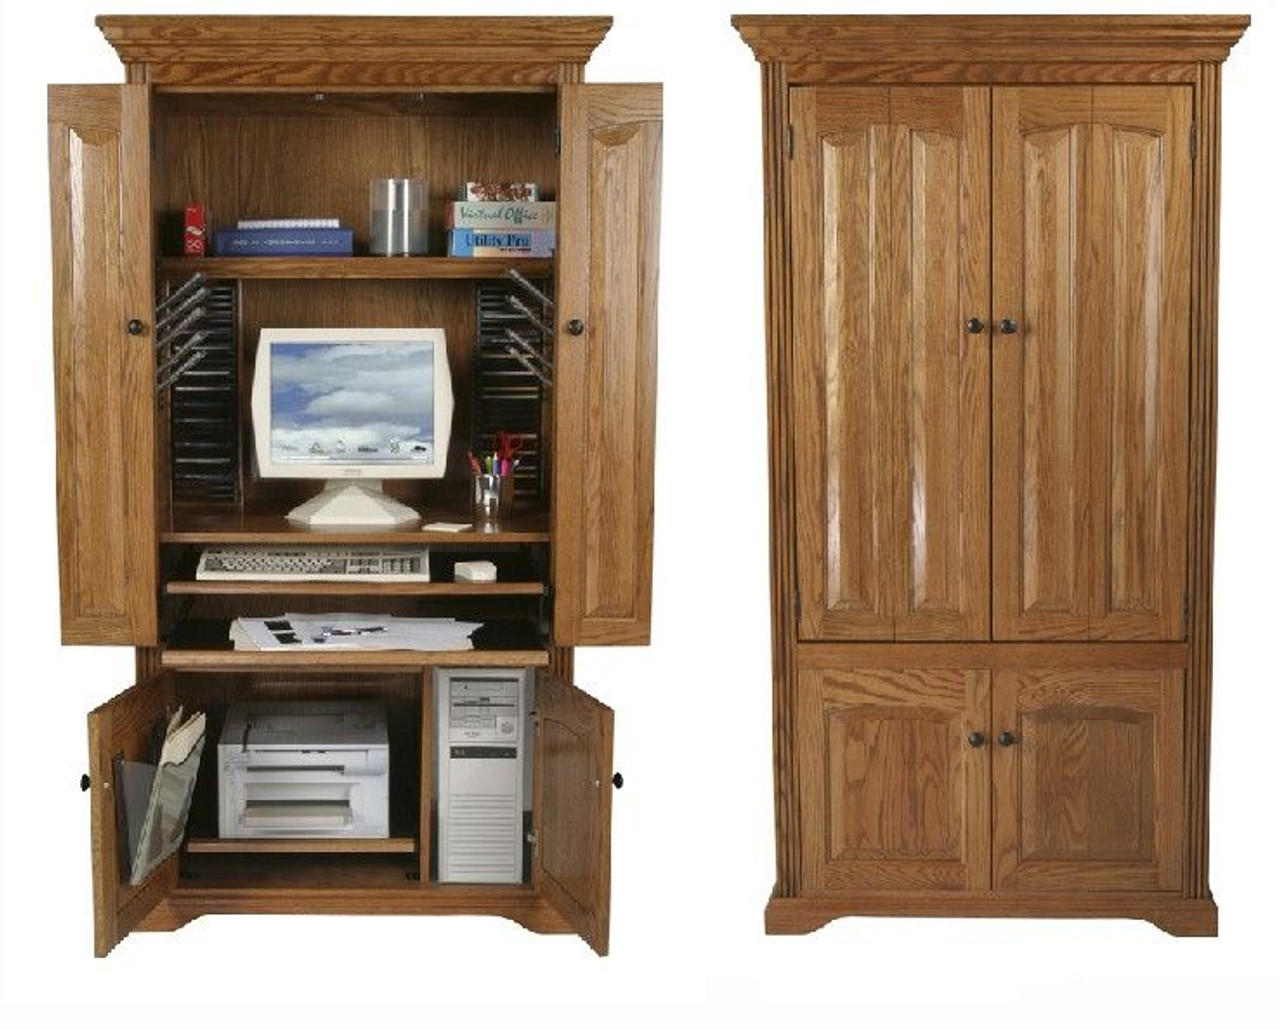 Eagle 38 x 72" Montclair Oak Ridge American Hardwood Home Office Furniture Computer Armoire with 2 Bi-Fold Raised Panel Wood Doors, Fluted Detail, Printer Pull-Out Tray and CPU Storage, Available All Stain Finishes, Part # E-93415